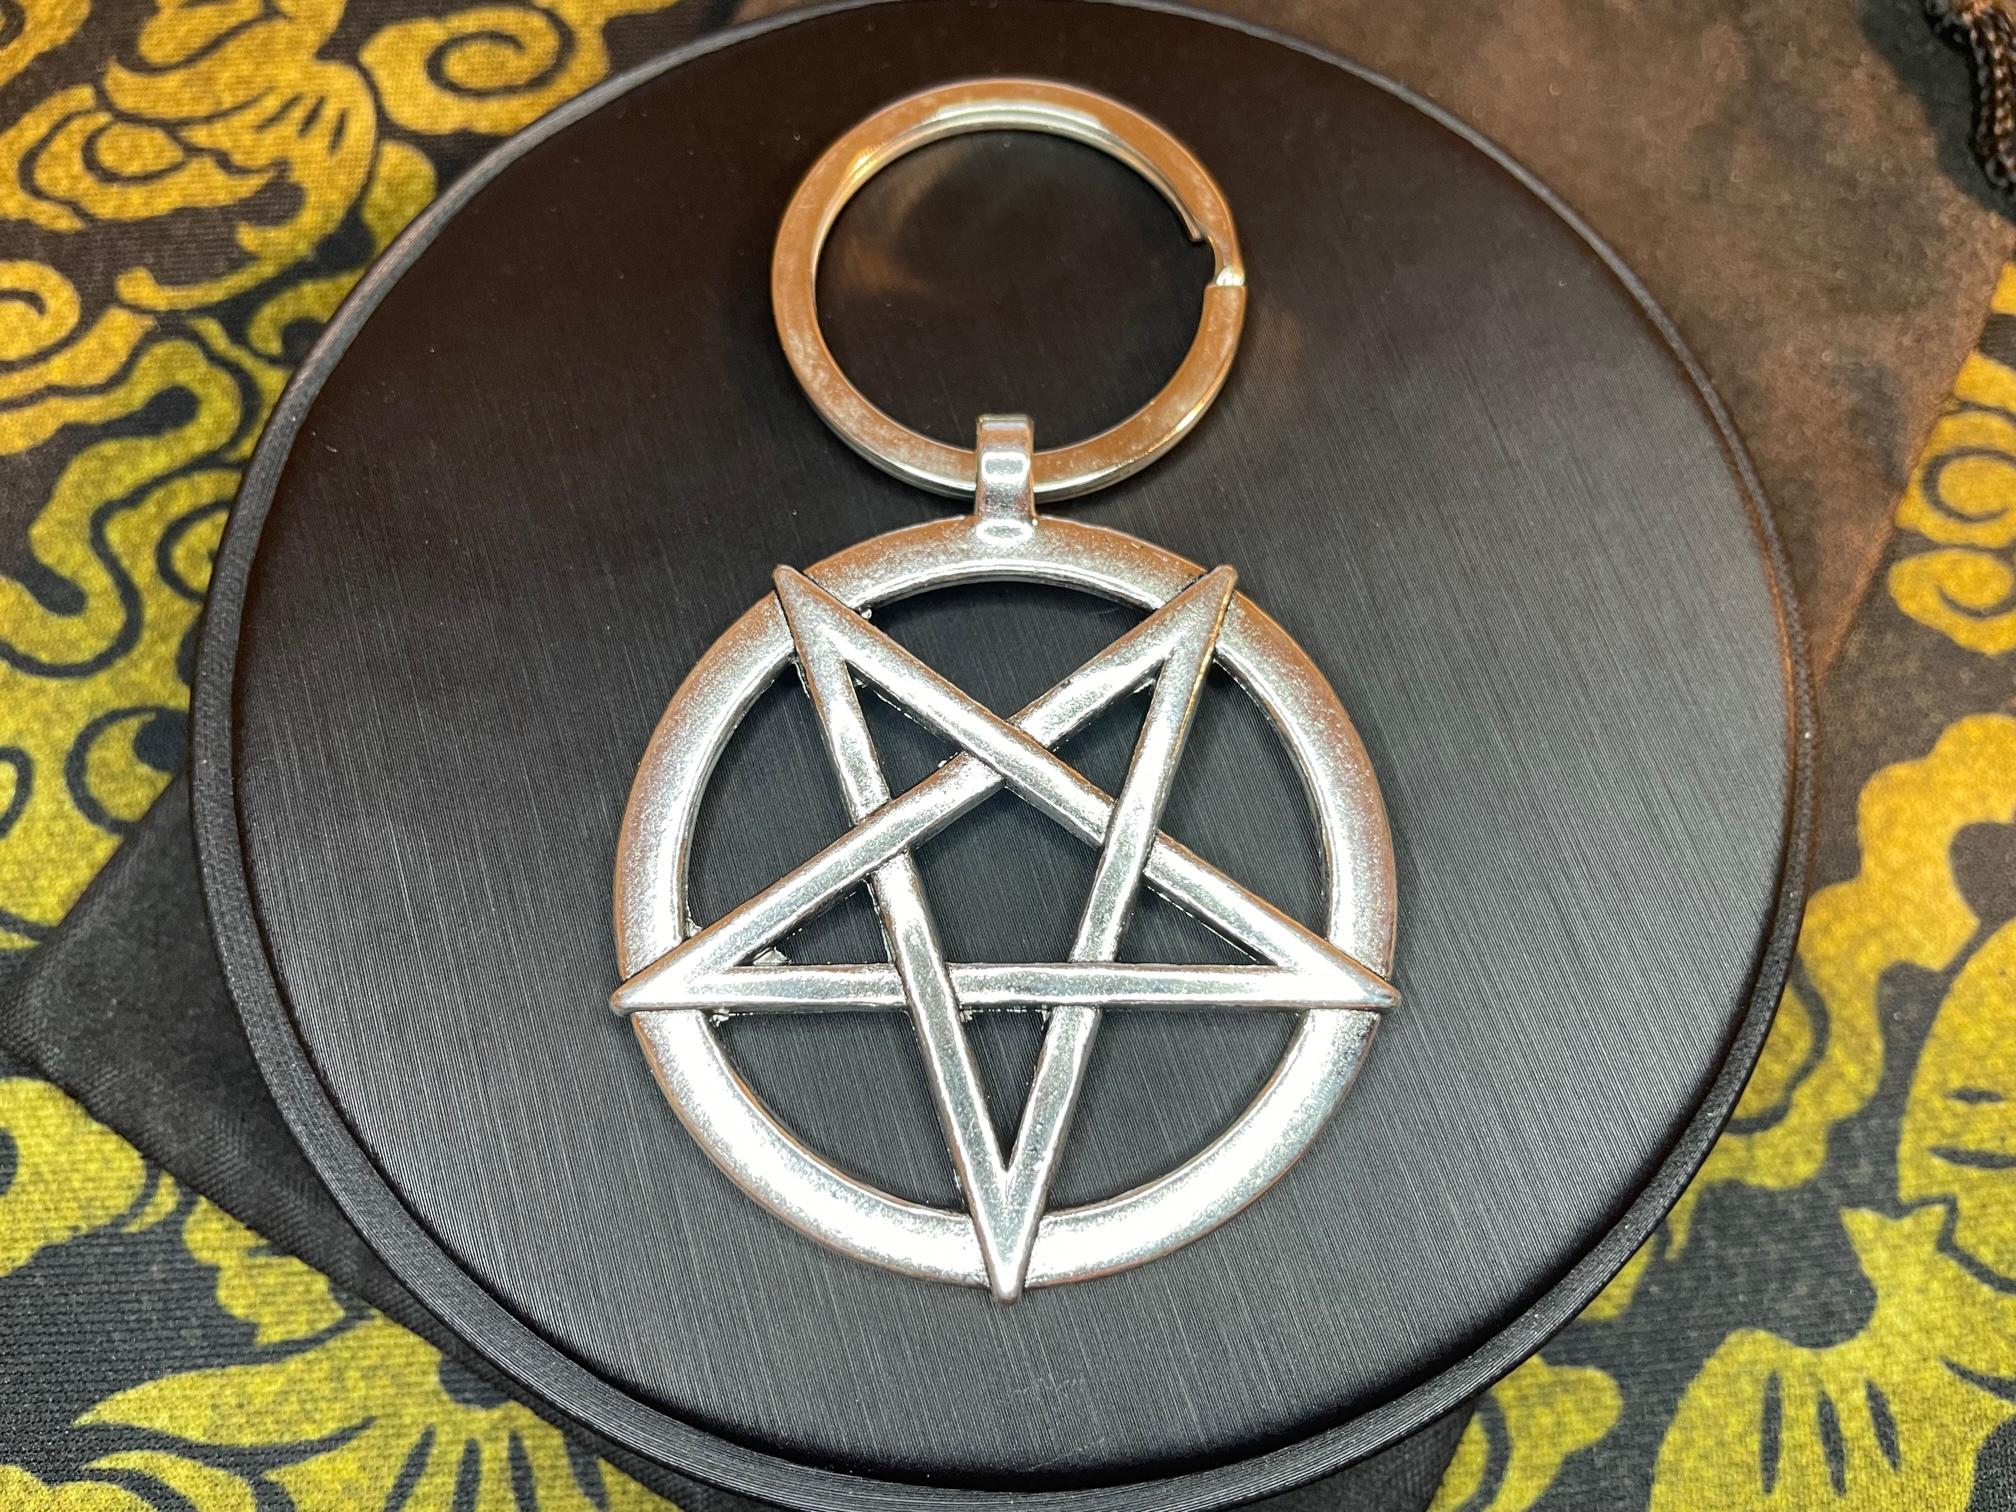 Stainless Steel Pentagram Keychain Sigil Lucifer Baphomet Inverted Upside Down Wiccan Satanic Gothic Pagan Druid Witchcraft Darkness Jewelry Silver